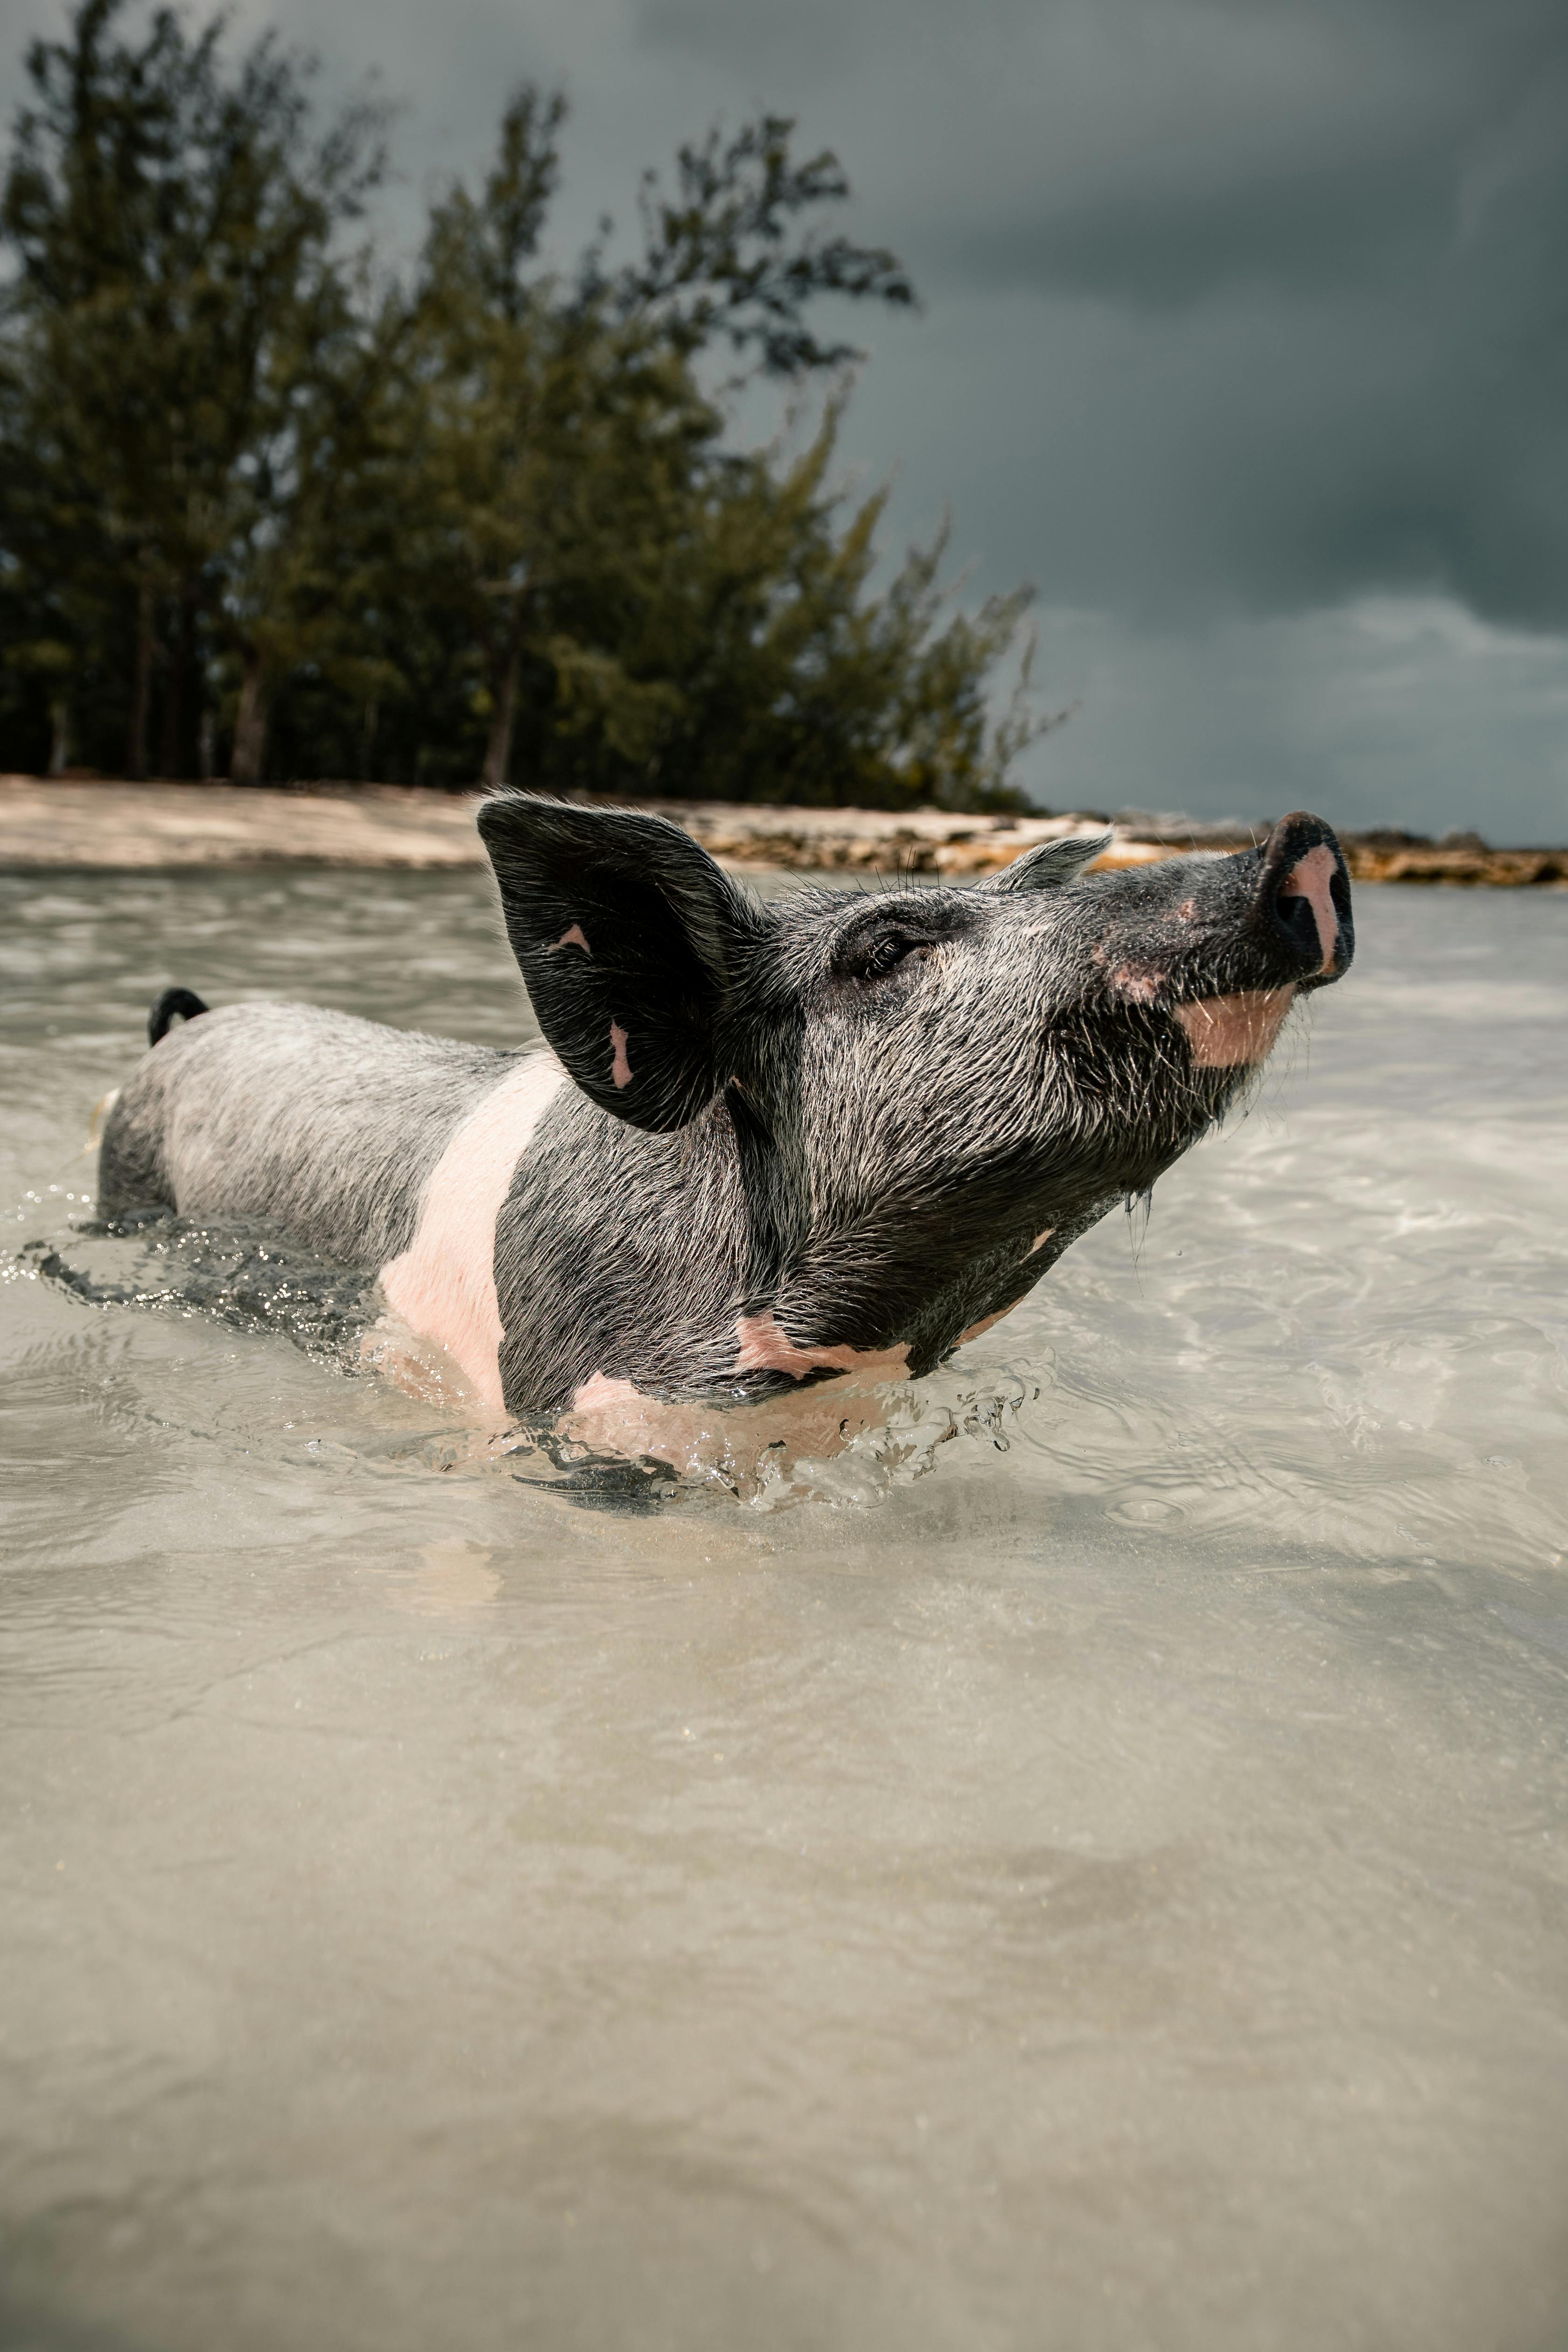 white and black short coated pig running on water